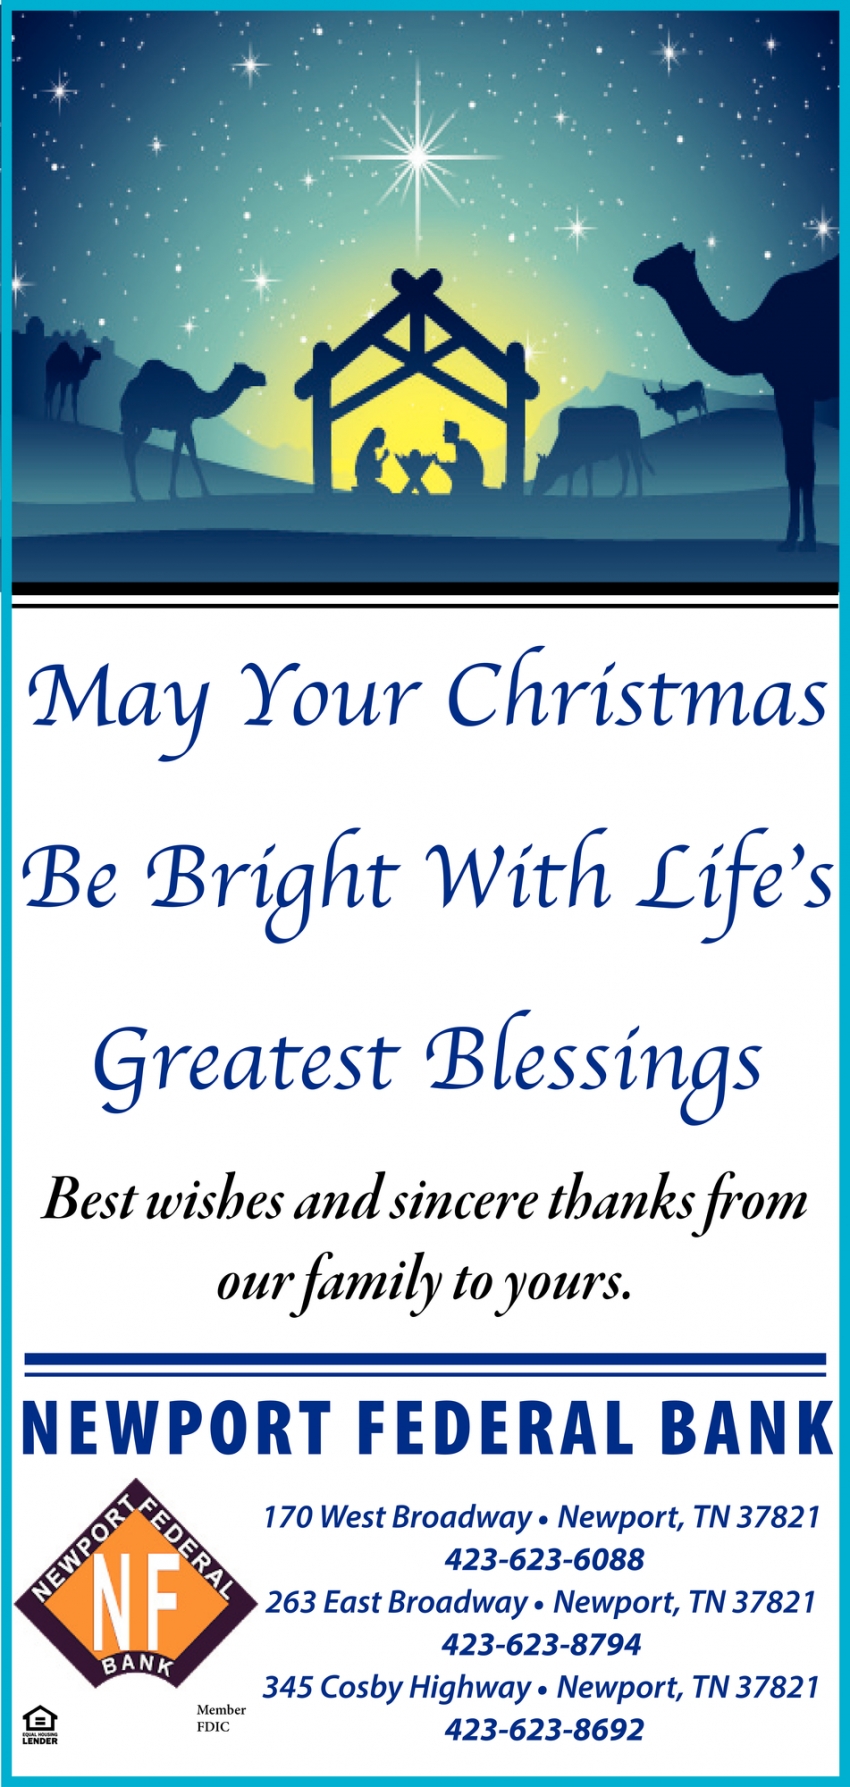 May Your Christmas Be Bright With Life's Greatest Blessings